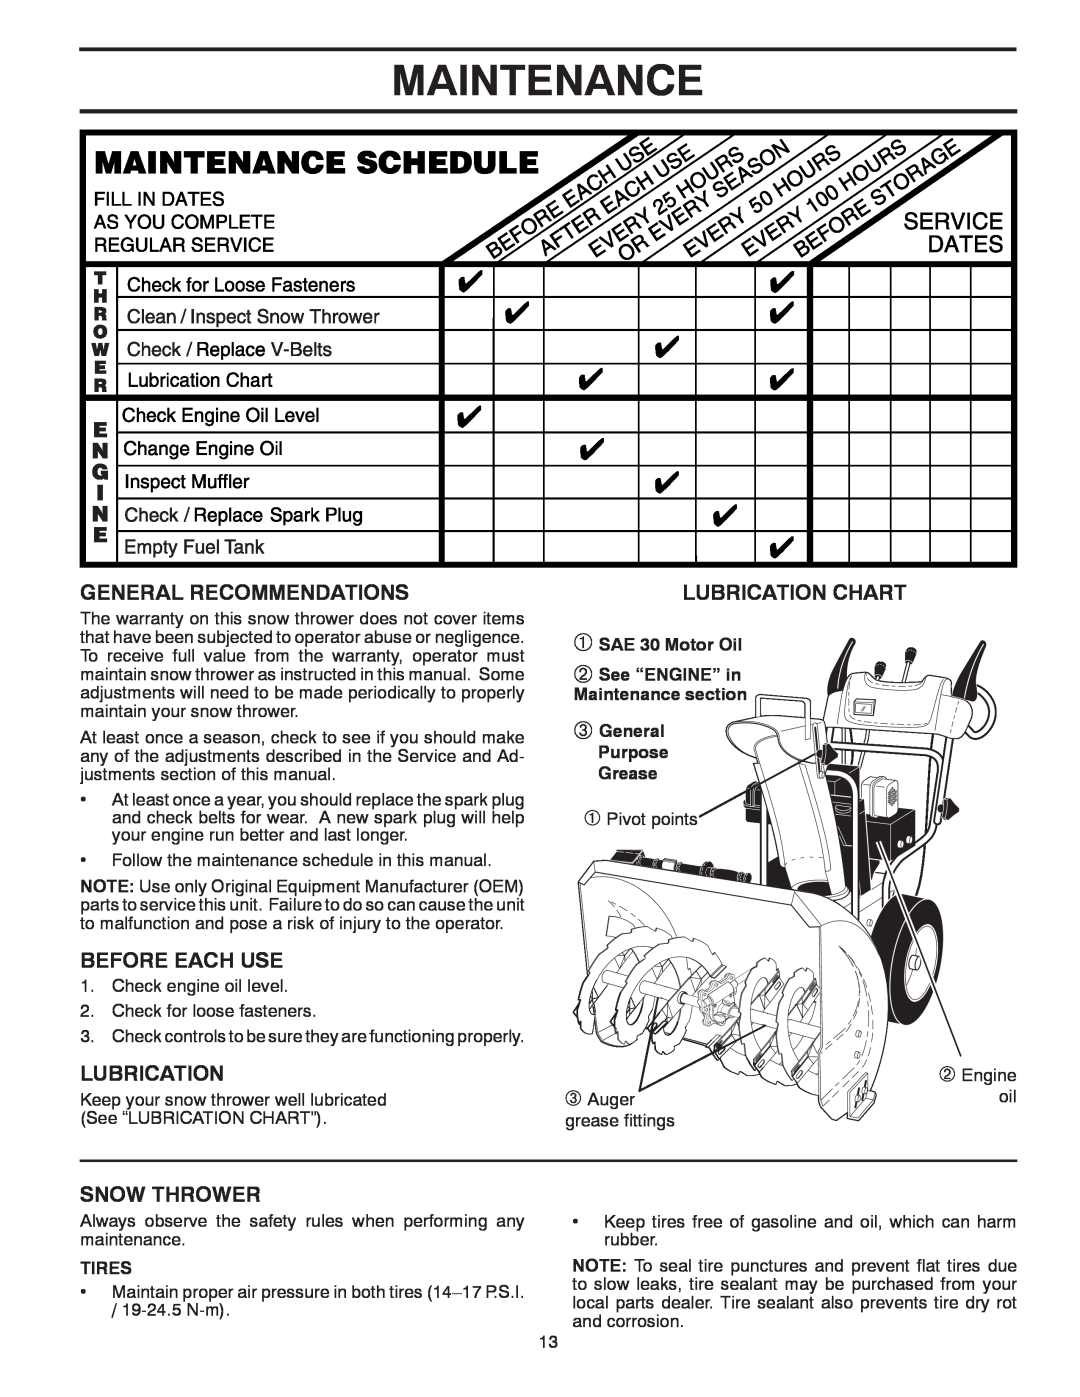 Poulan 422073 Maintenance, General Recommendations, Before Each Use, Snow Thrower, Lubrication Chart, Purpose Grease 